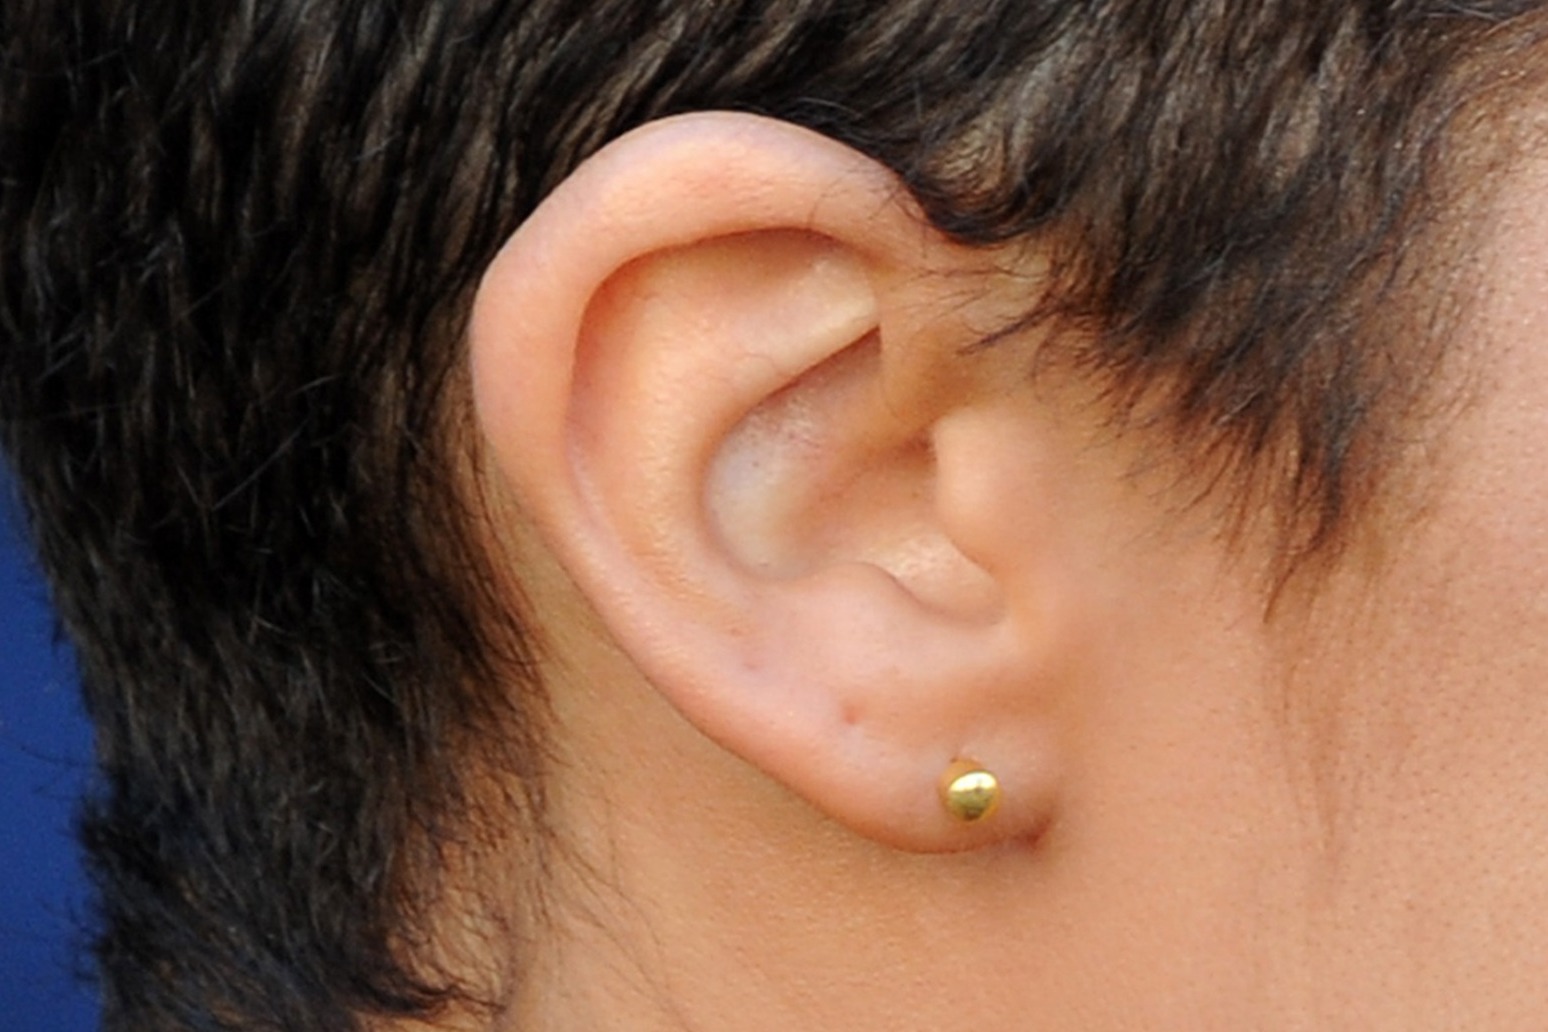 Warning over ‘postcode lottery’ ear care 